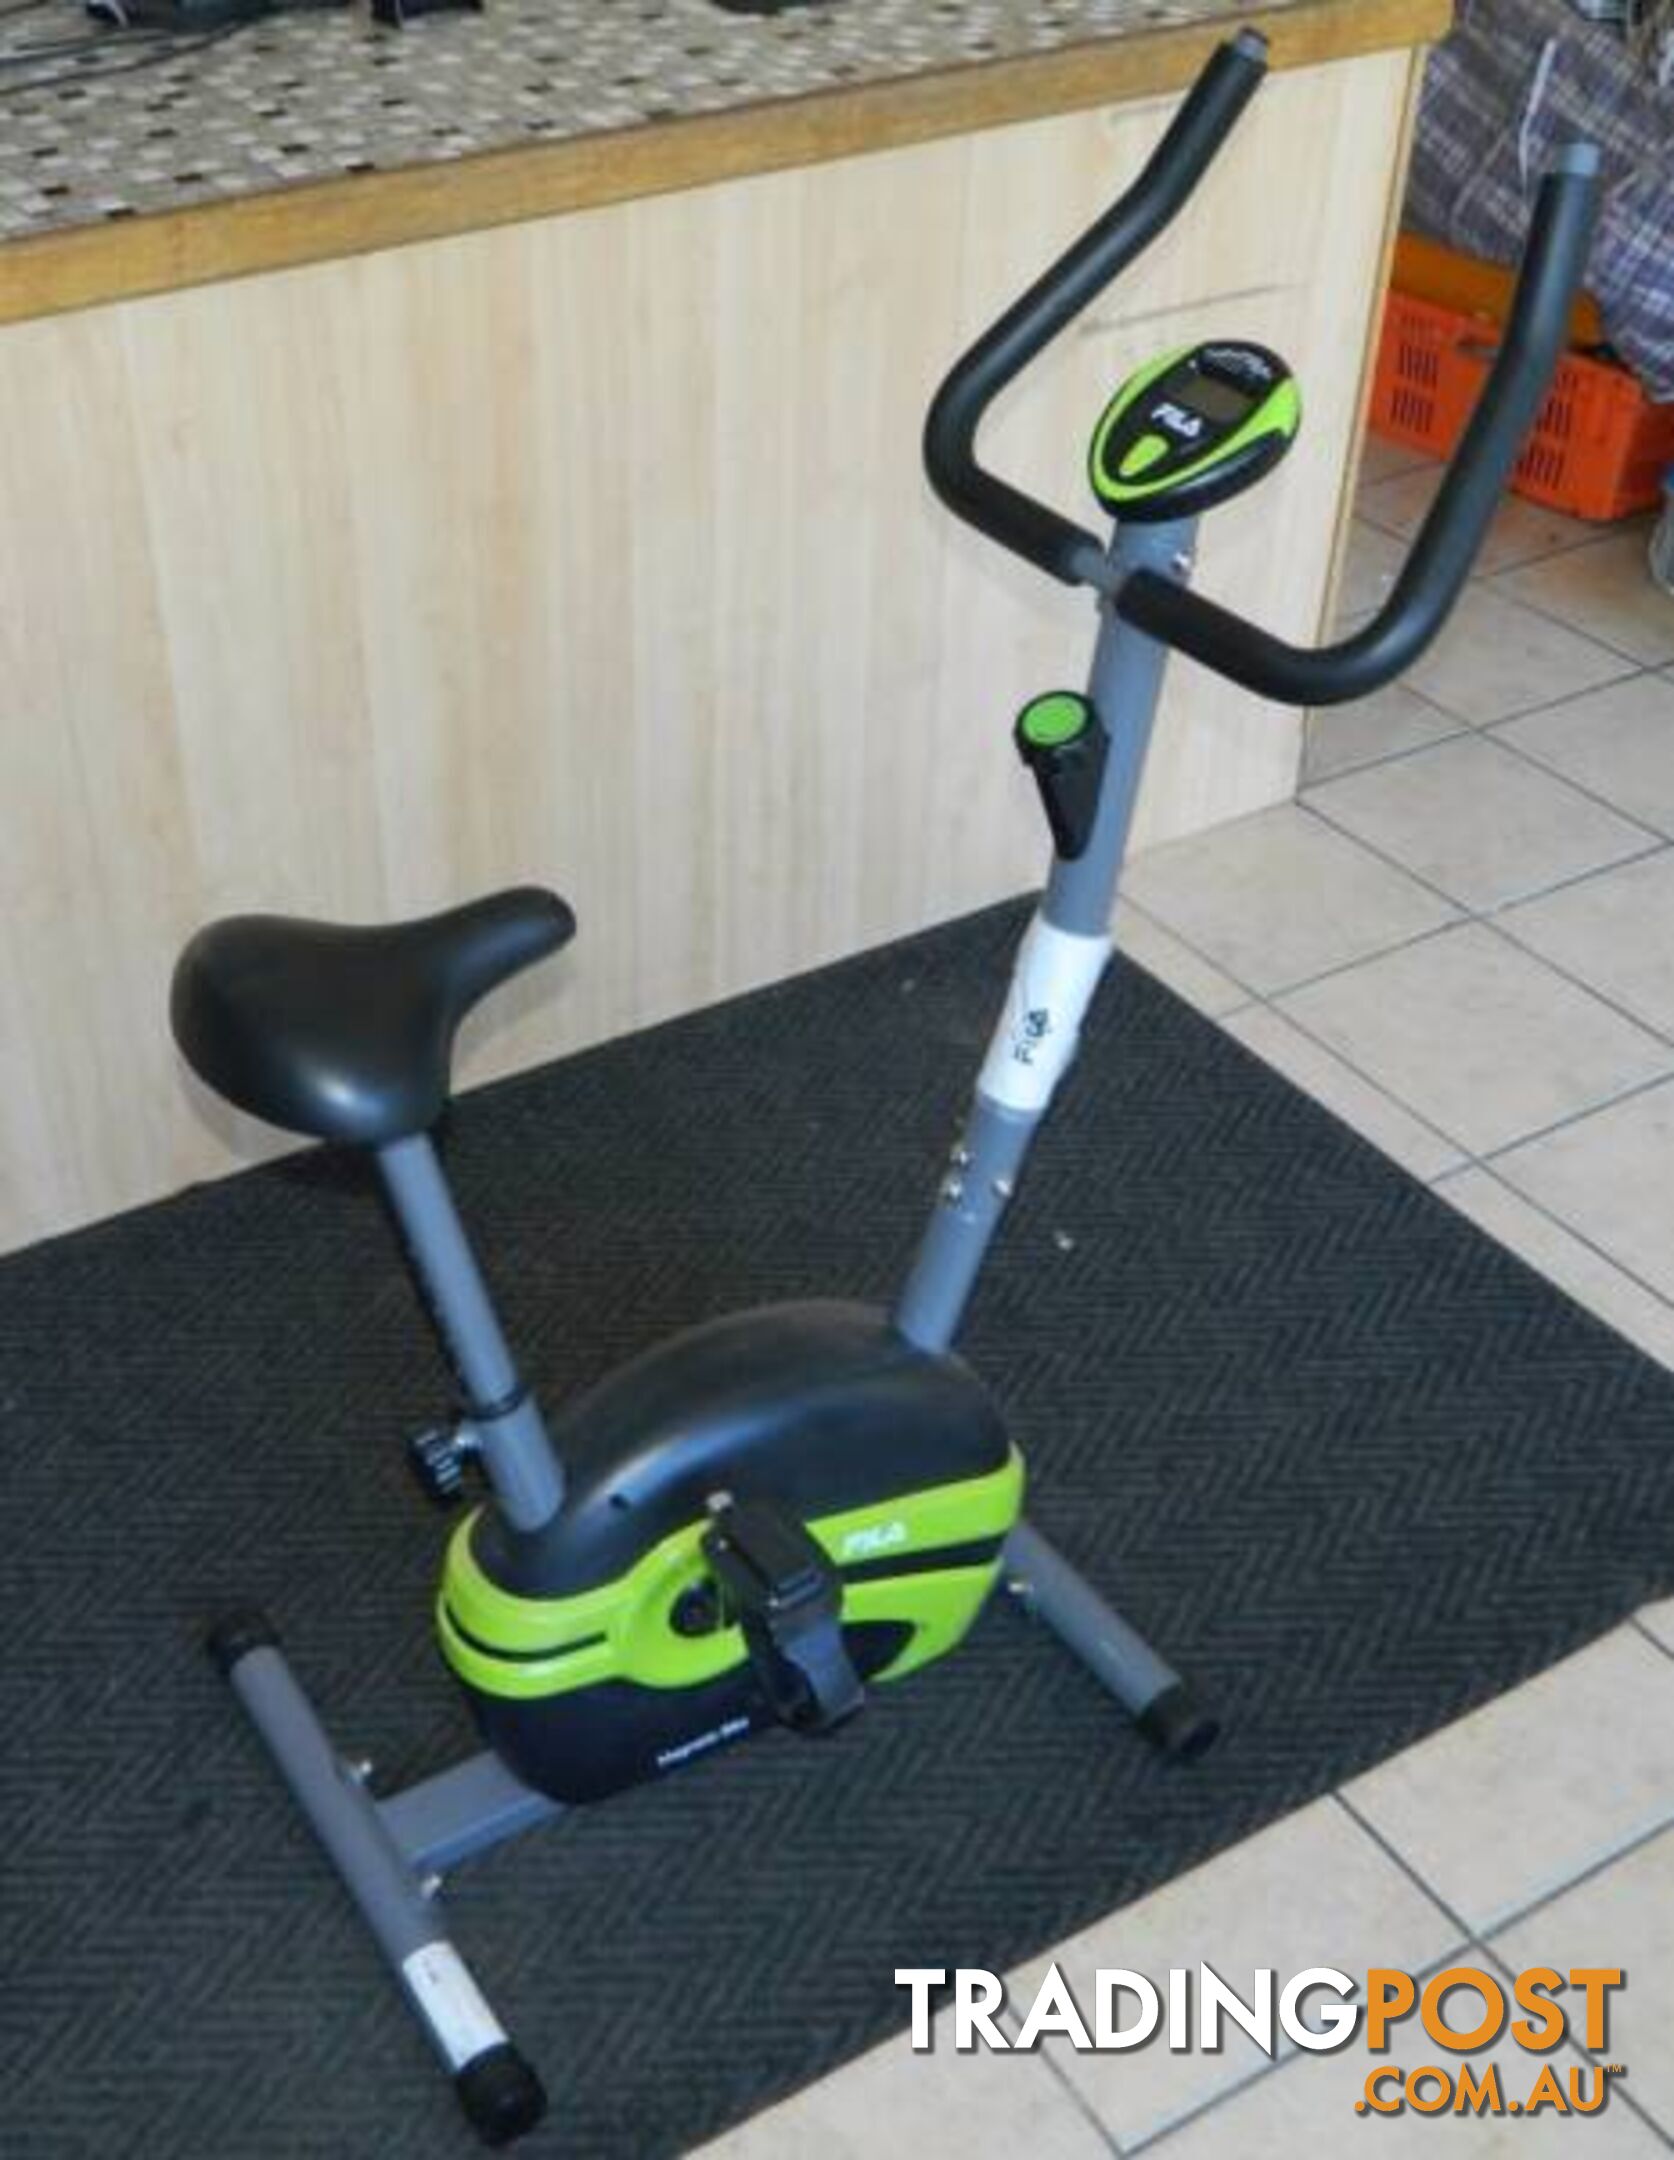 Fila Magnetic Excercise Bike with Electronic Display